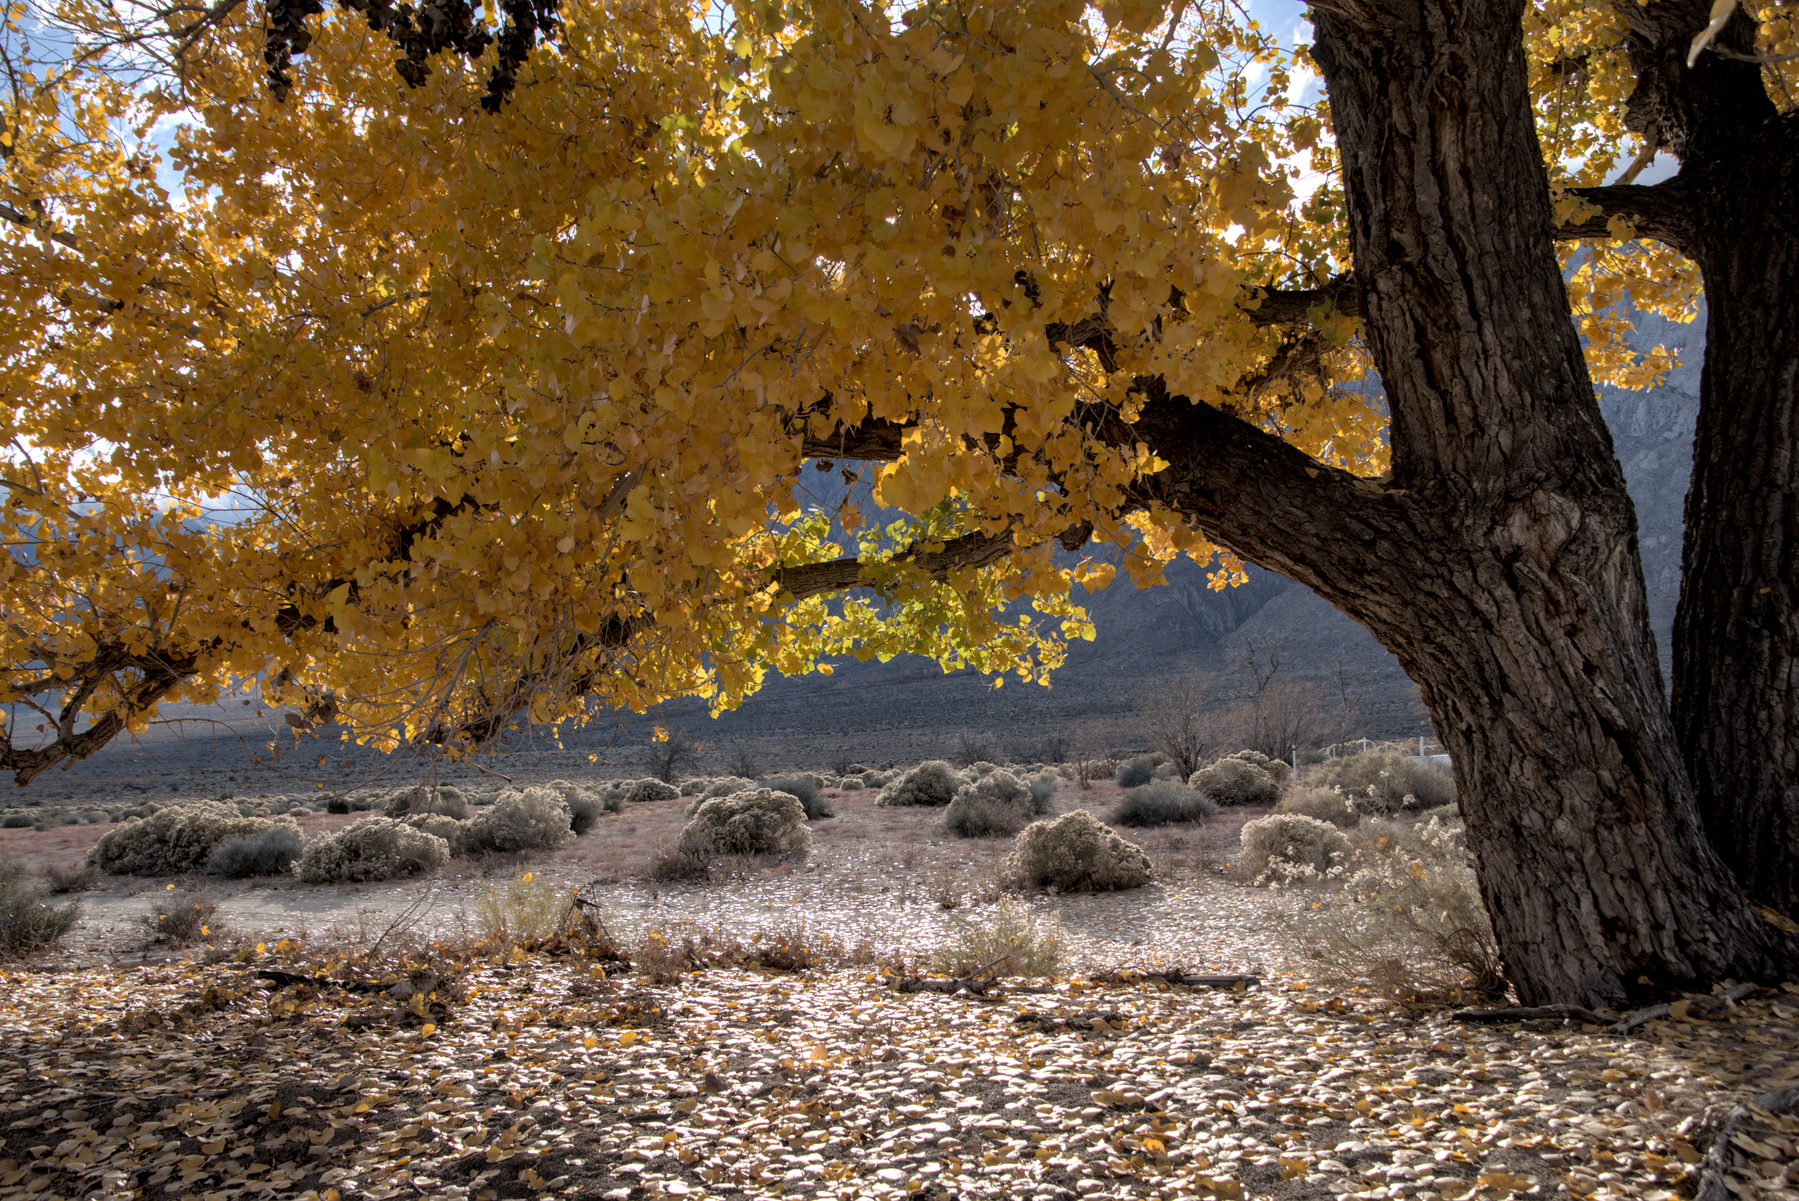 A large, low bough extends from the trunk of a cottonwood, shrouded in golden yellow leaves.  Looking under the bough, desert sage runs for a long way.  Golden leaves litter the ground under the tree.